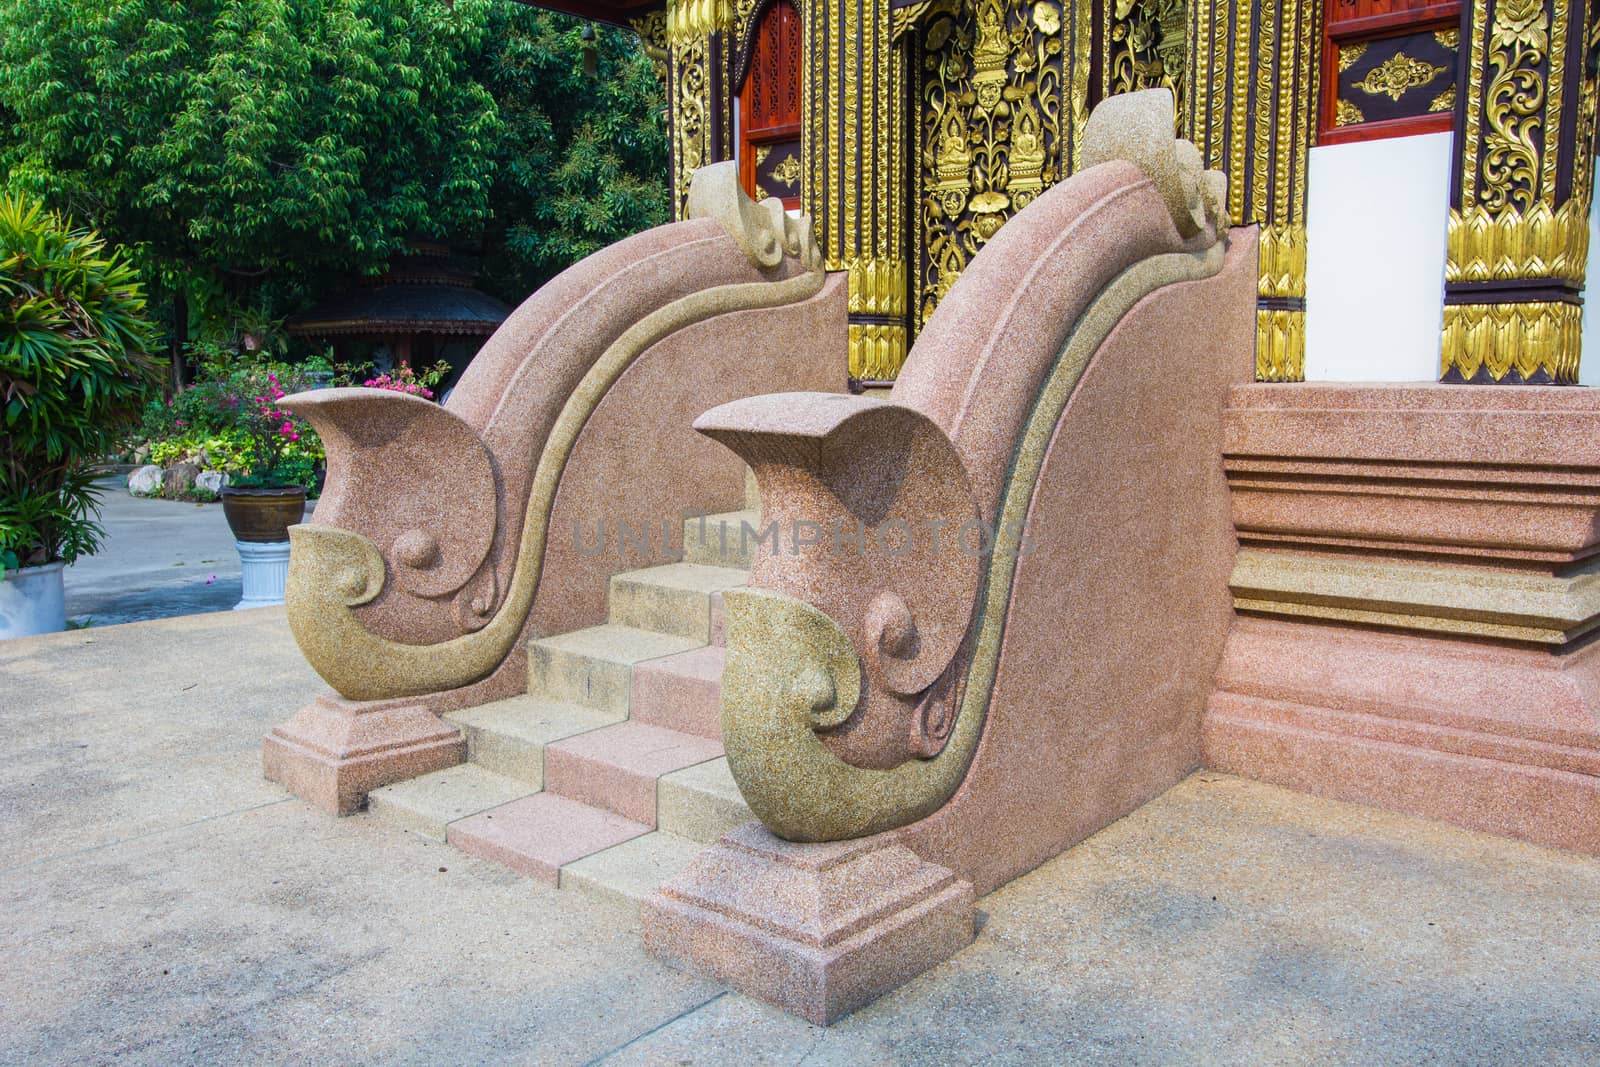 stone stairs and handrail of a temple in Thailand